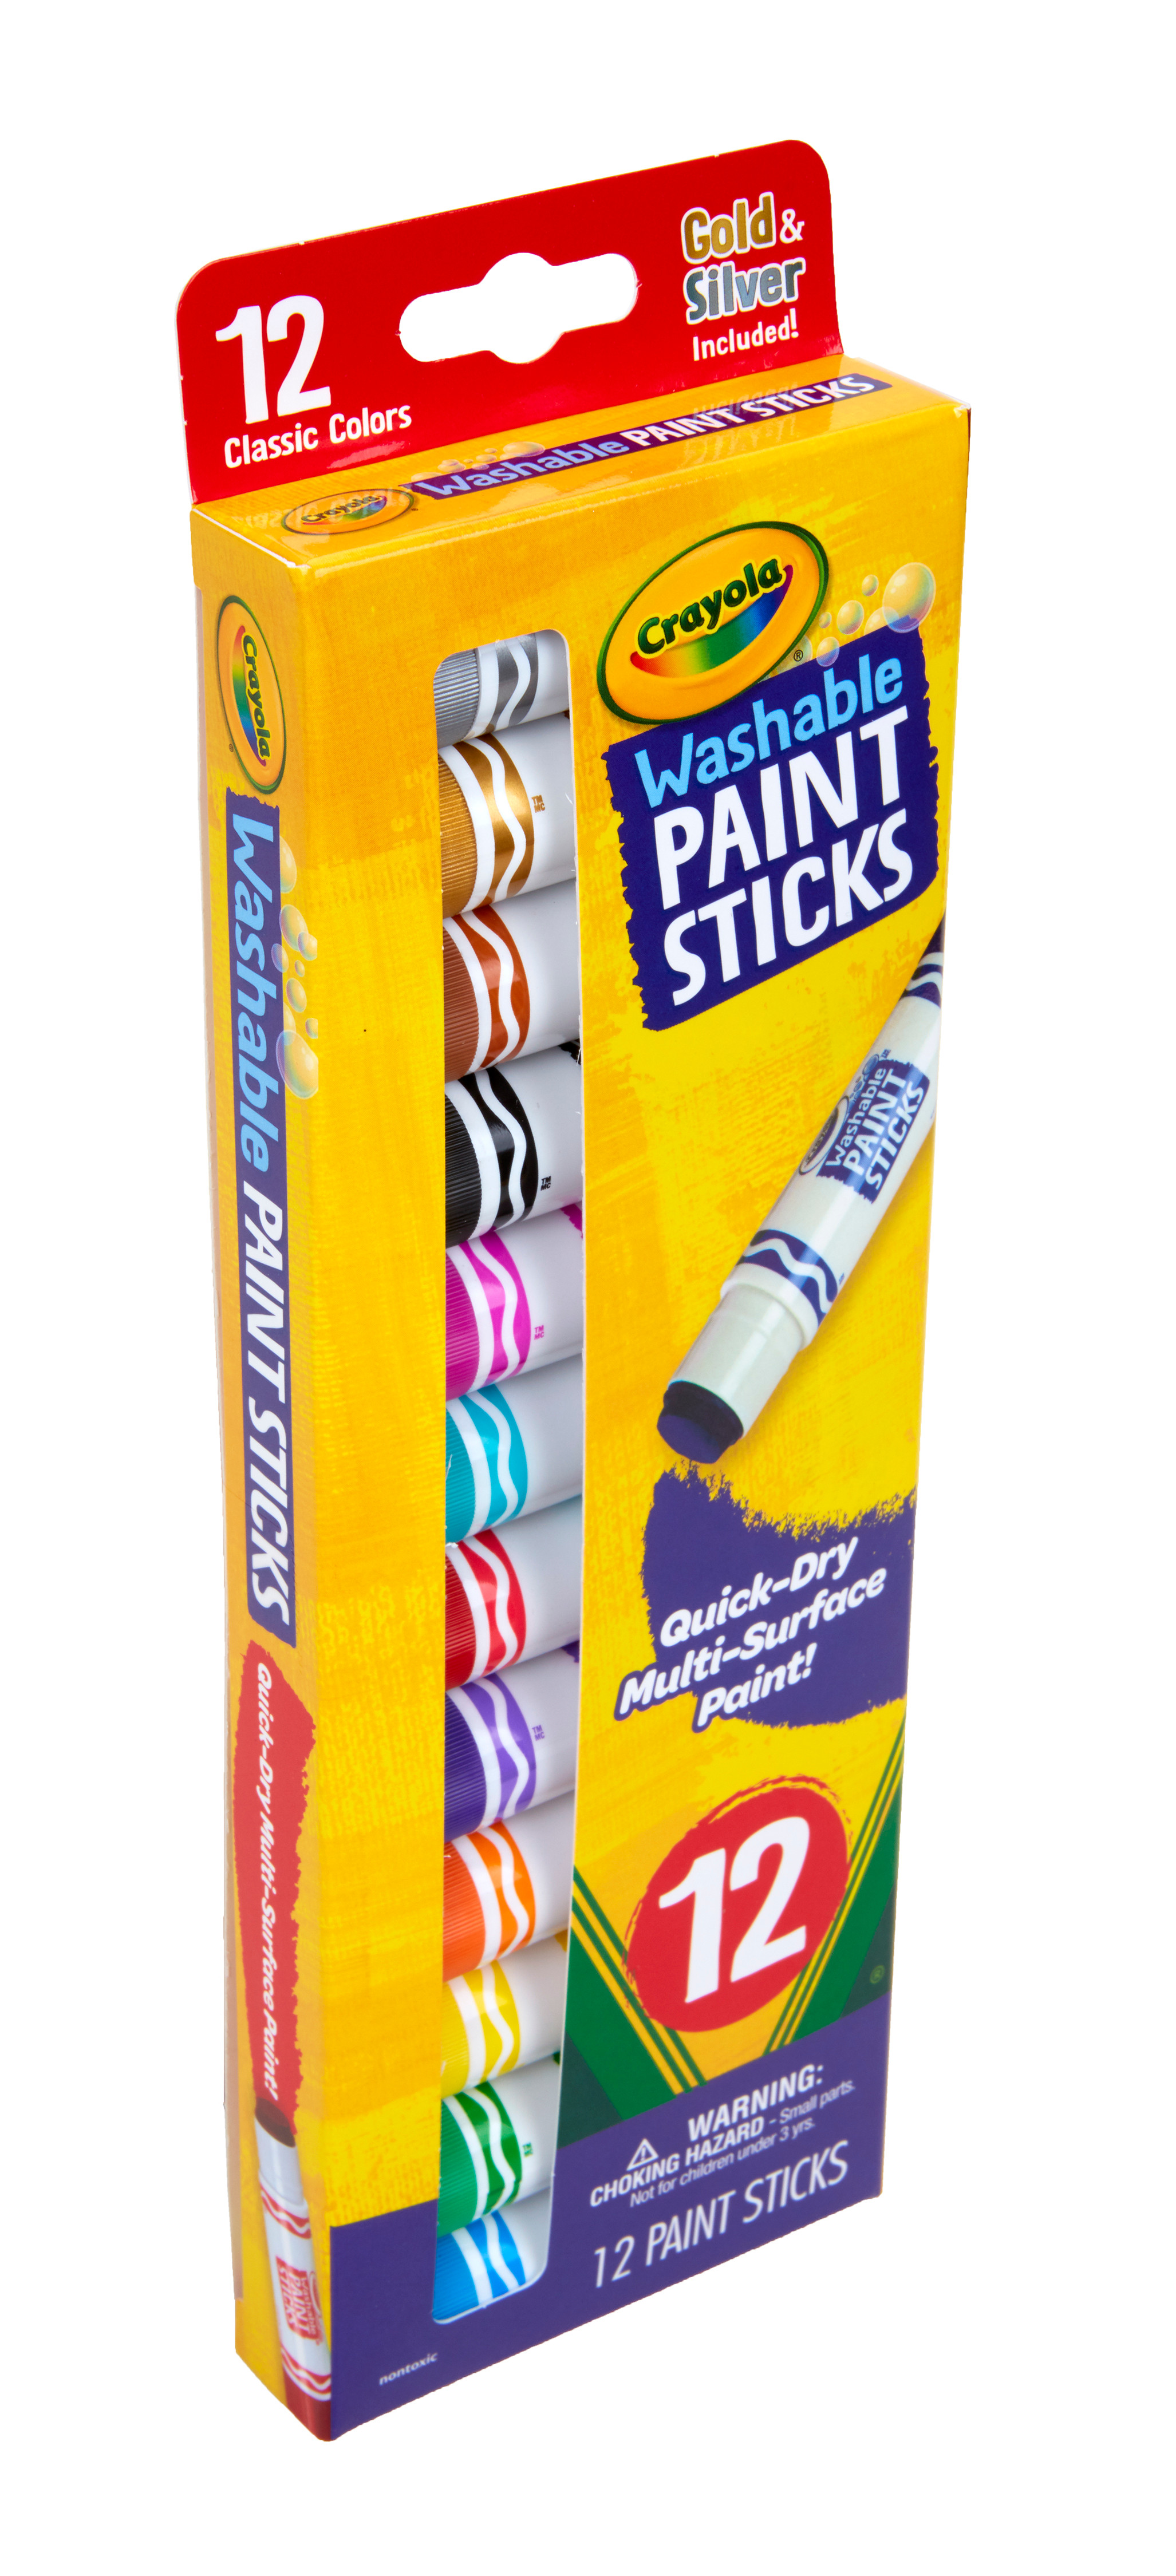 Crayola Quick Dry Paint Sticks, Assorted Colors, Washable Paint Set for Kids, 12 Count - image 5 of 8